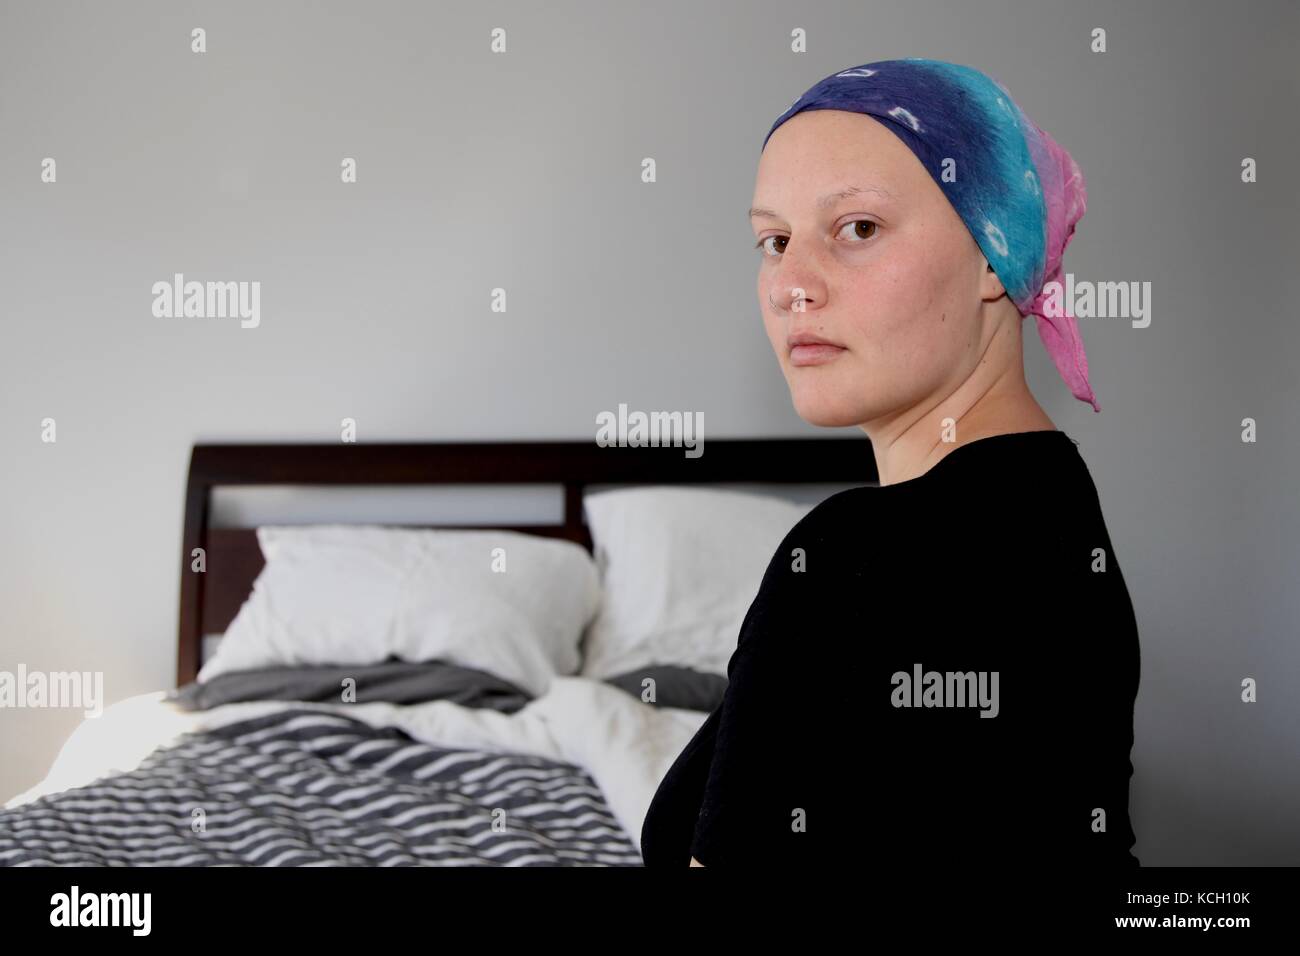 Young cancer patient in a headscarf looks at camera Stock Photo